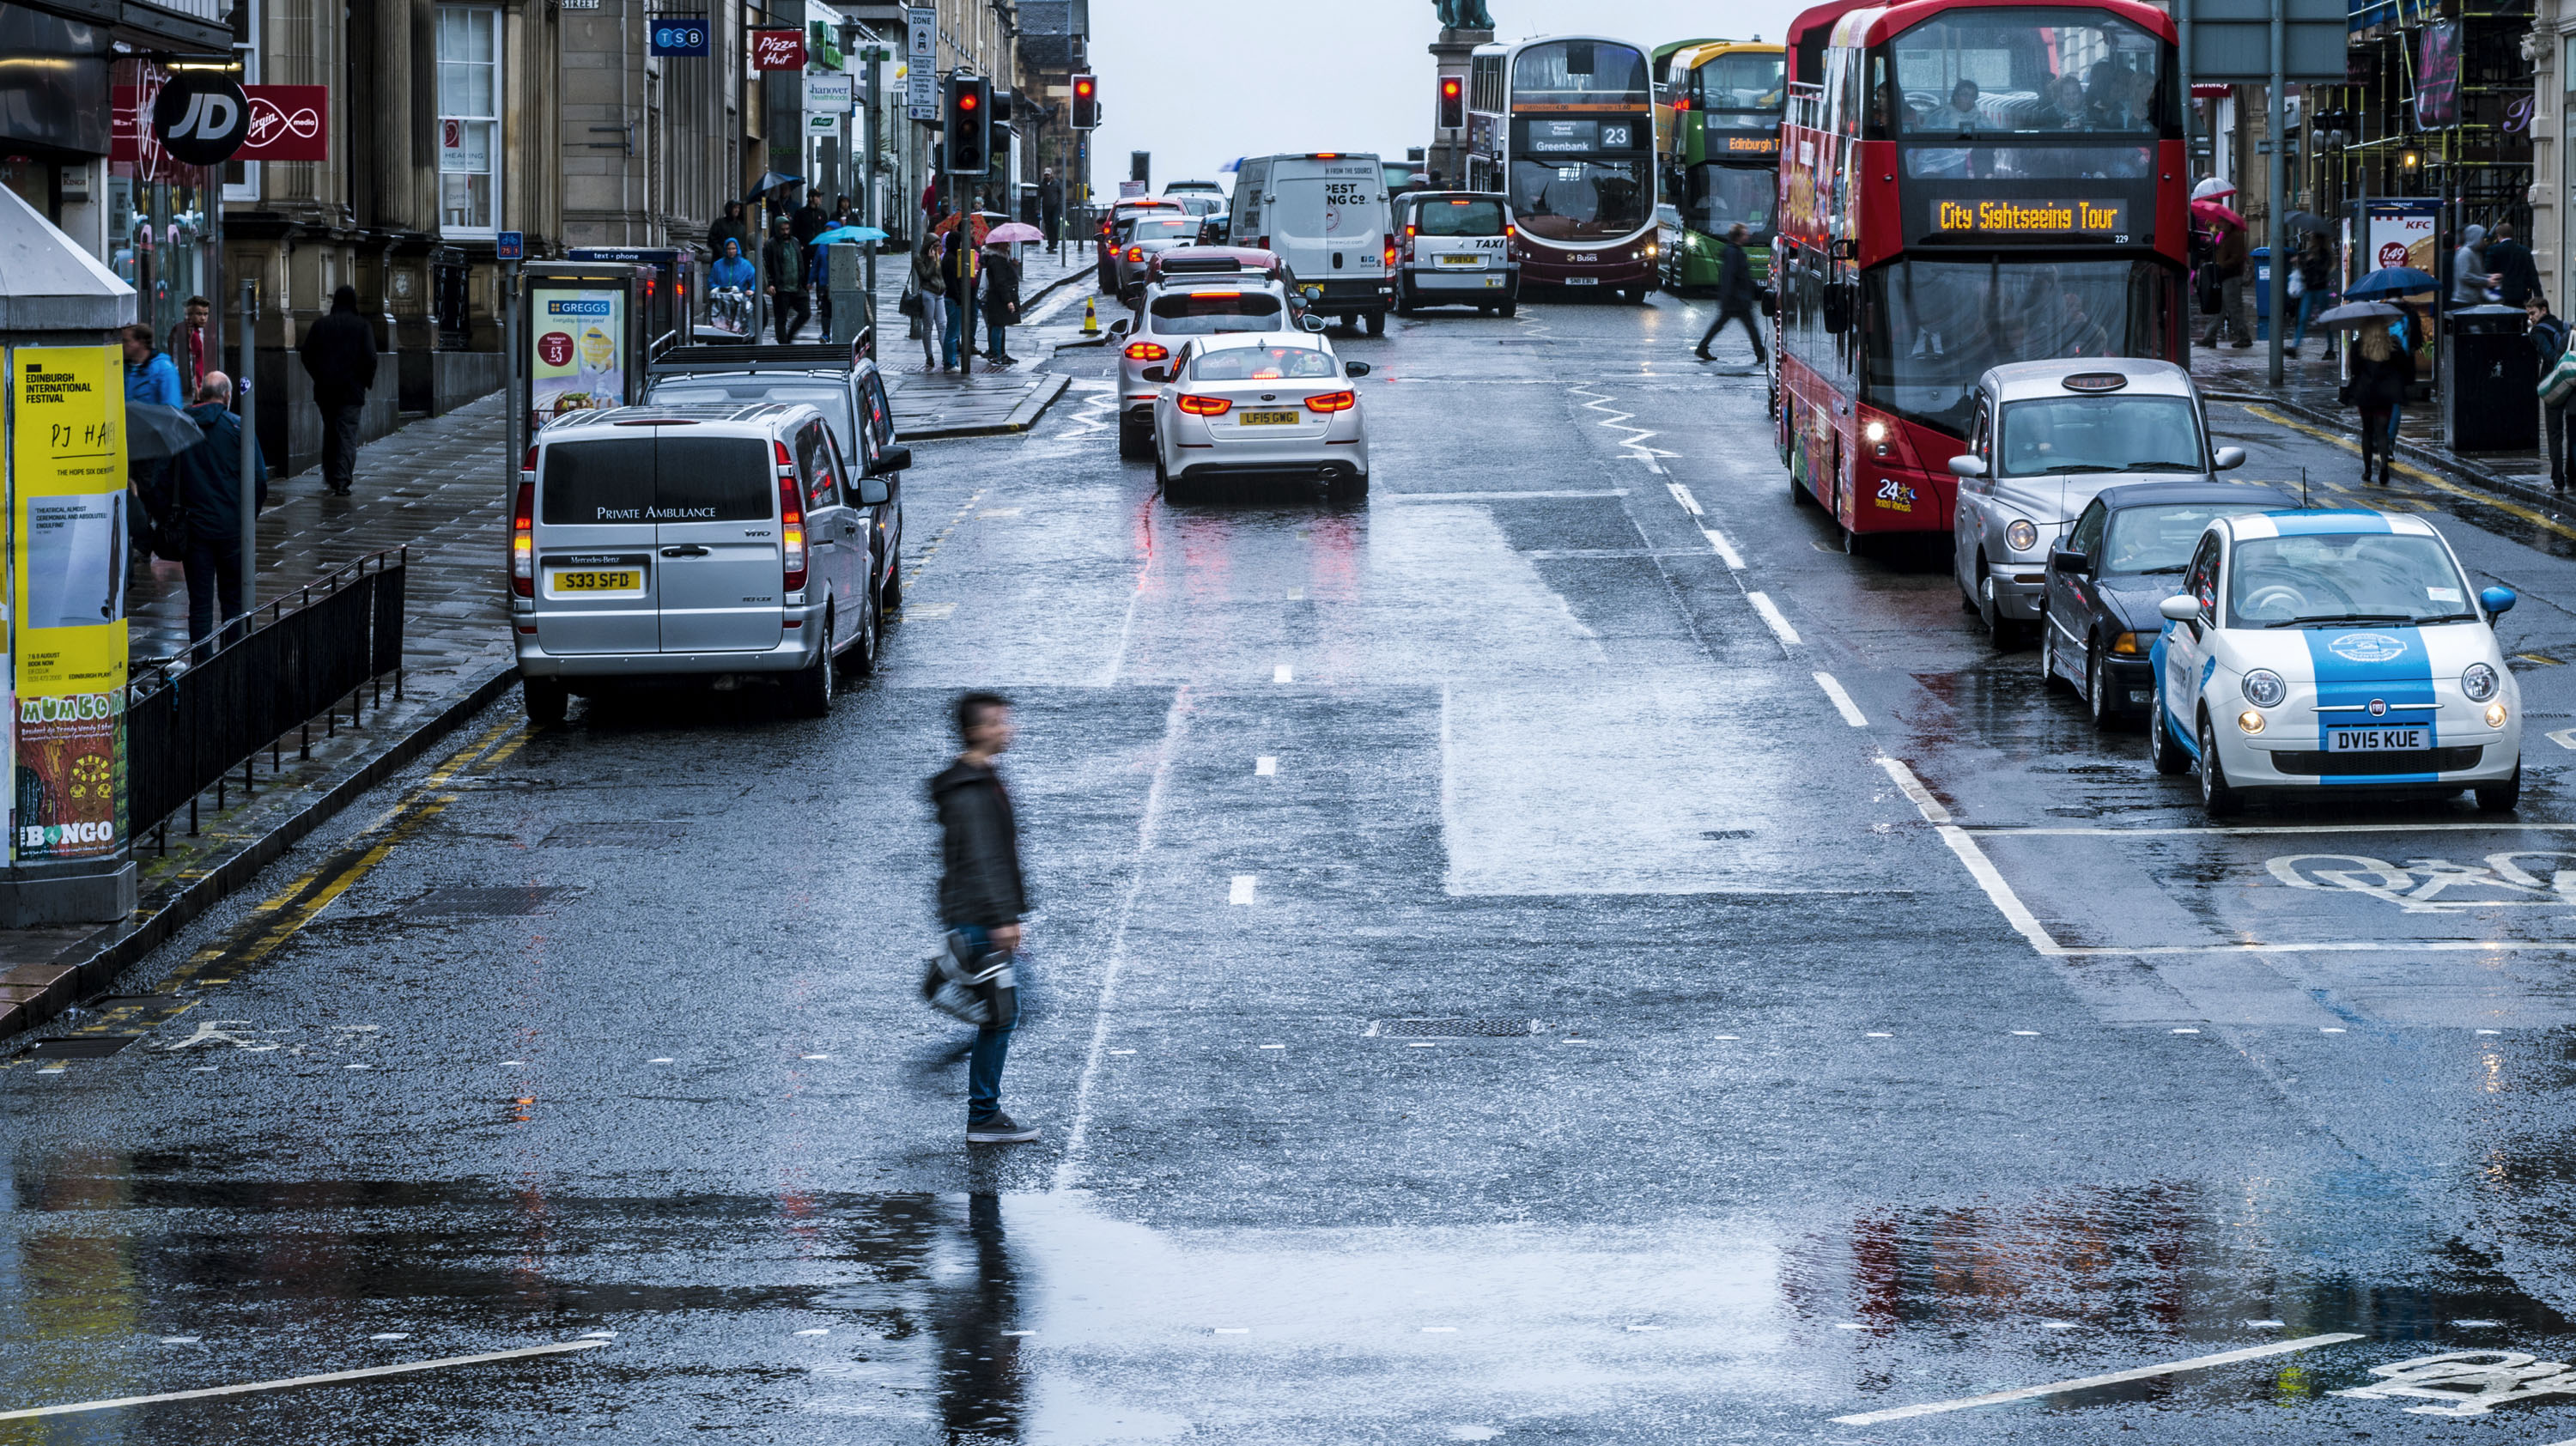 Busy city street in Edinburgh shows need for low emission zones